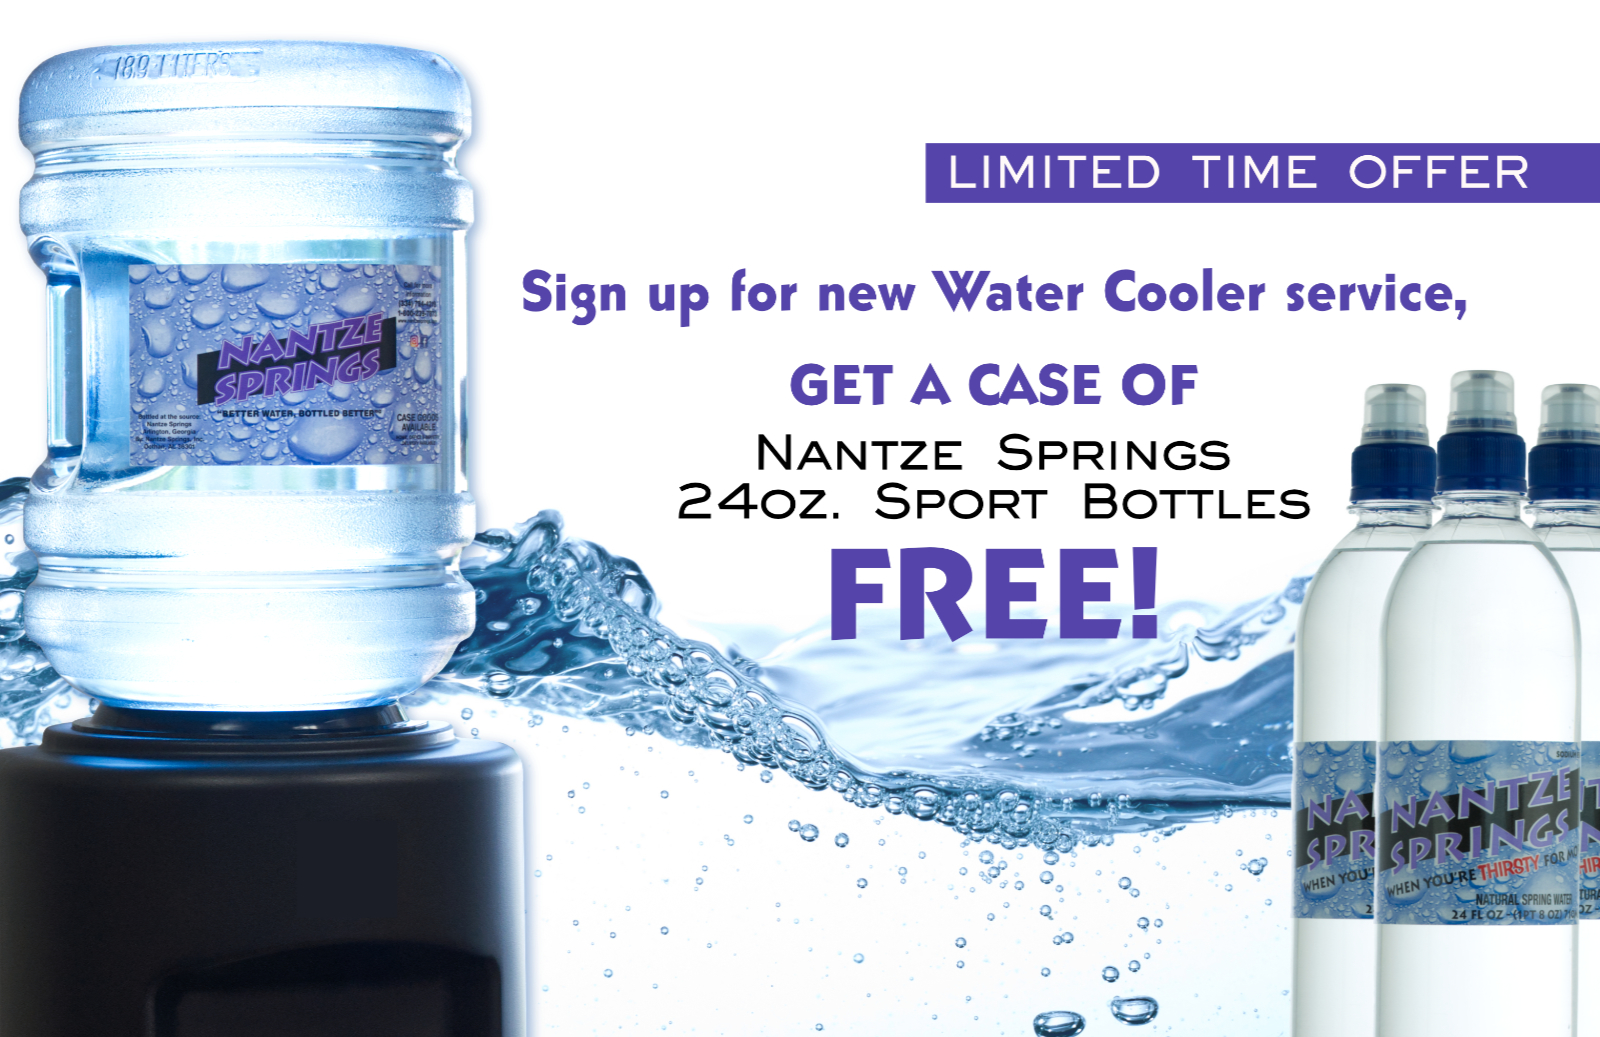 New Customer Special - Get a Cases of 24oz Sport Bottles FREE, with new Cooler Service